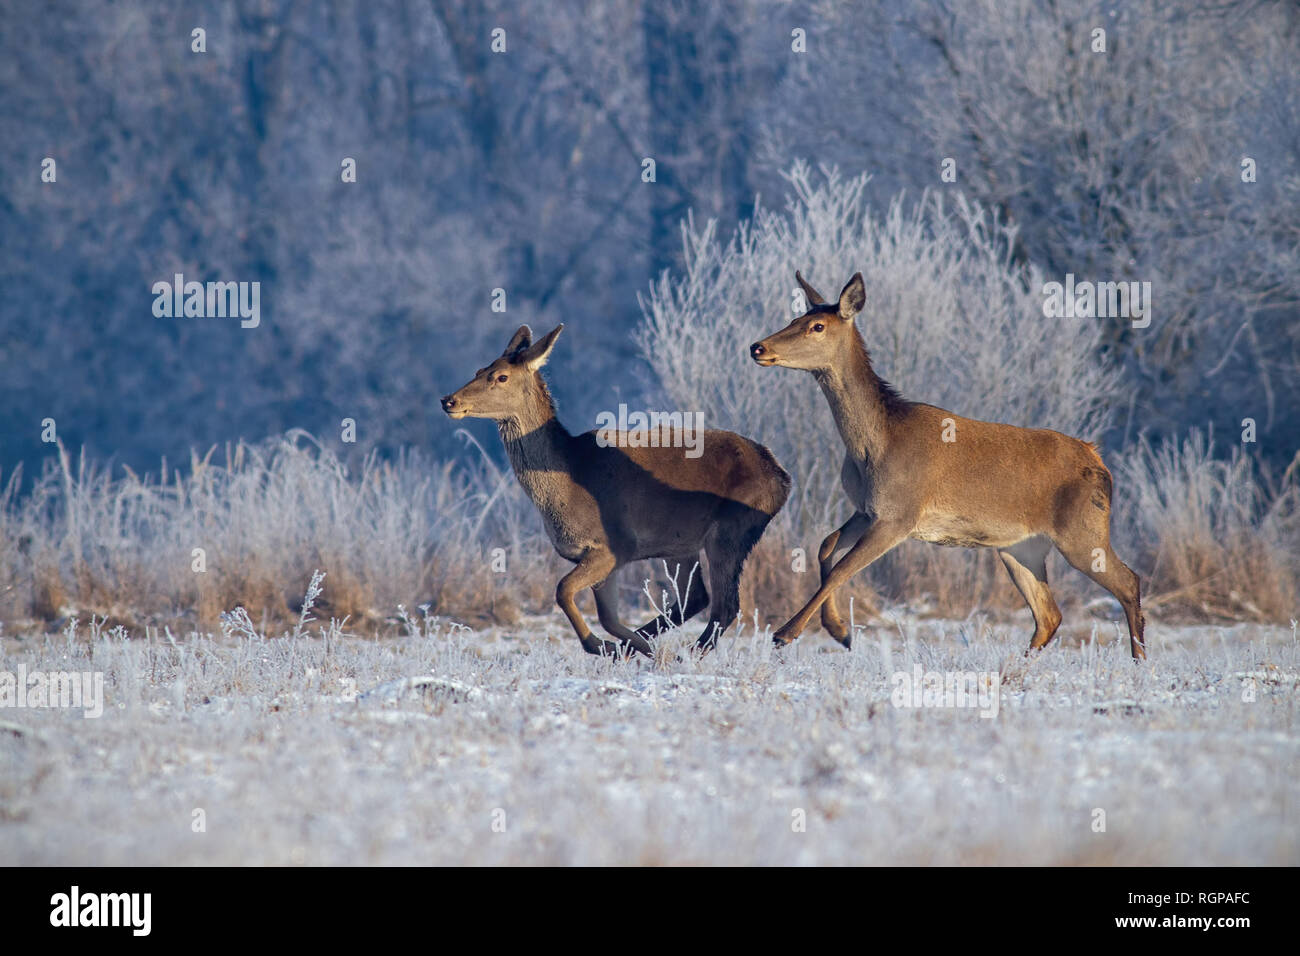 Red deer, cervus elaphus, running on meadow with frost covered grass in winter. Stock Photo